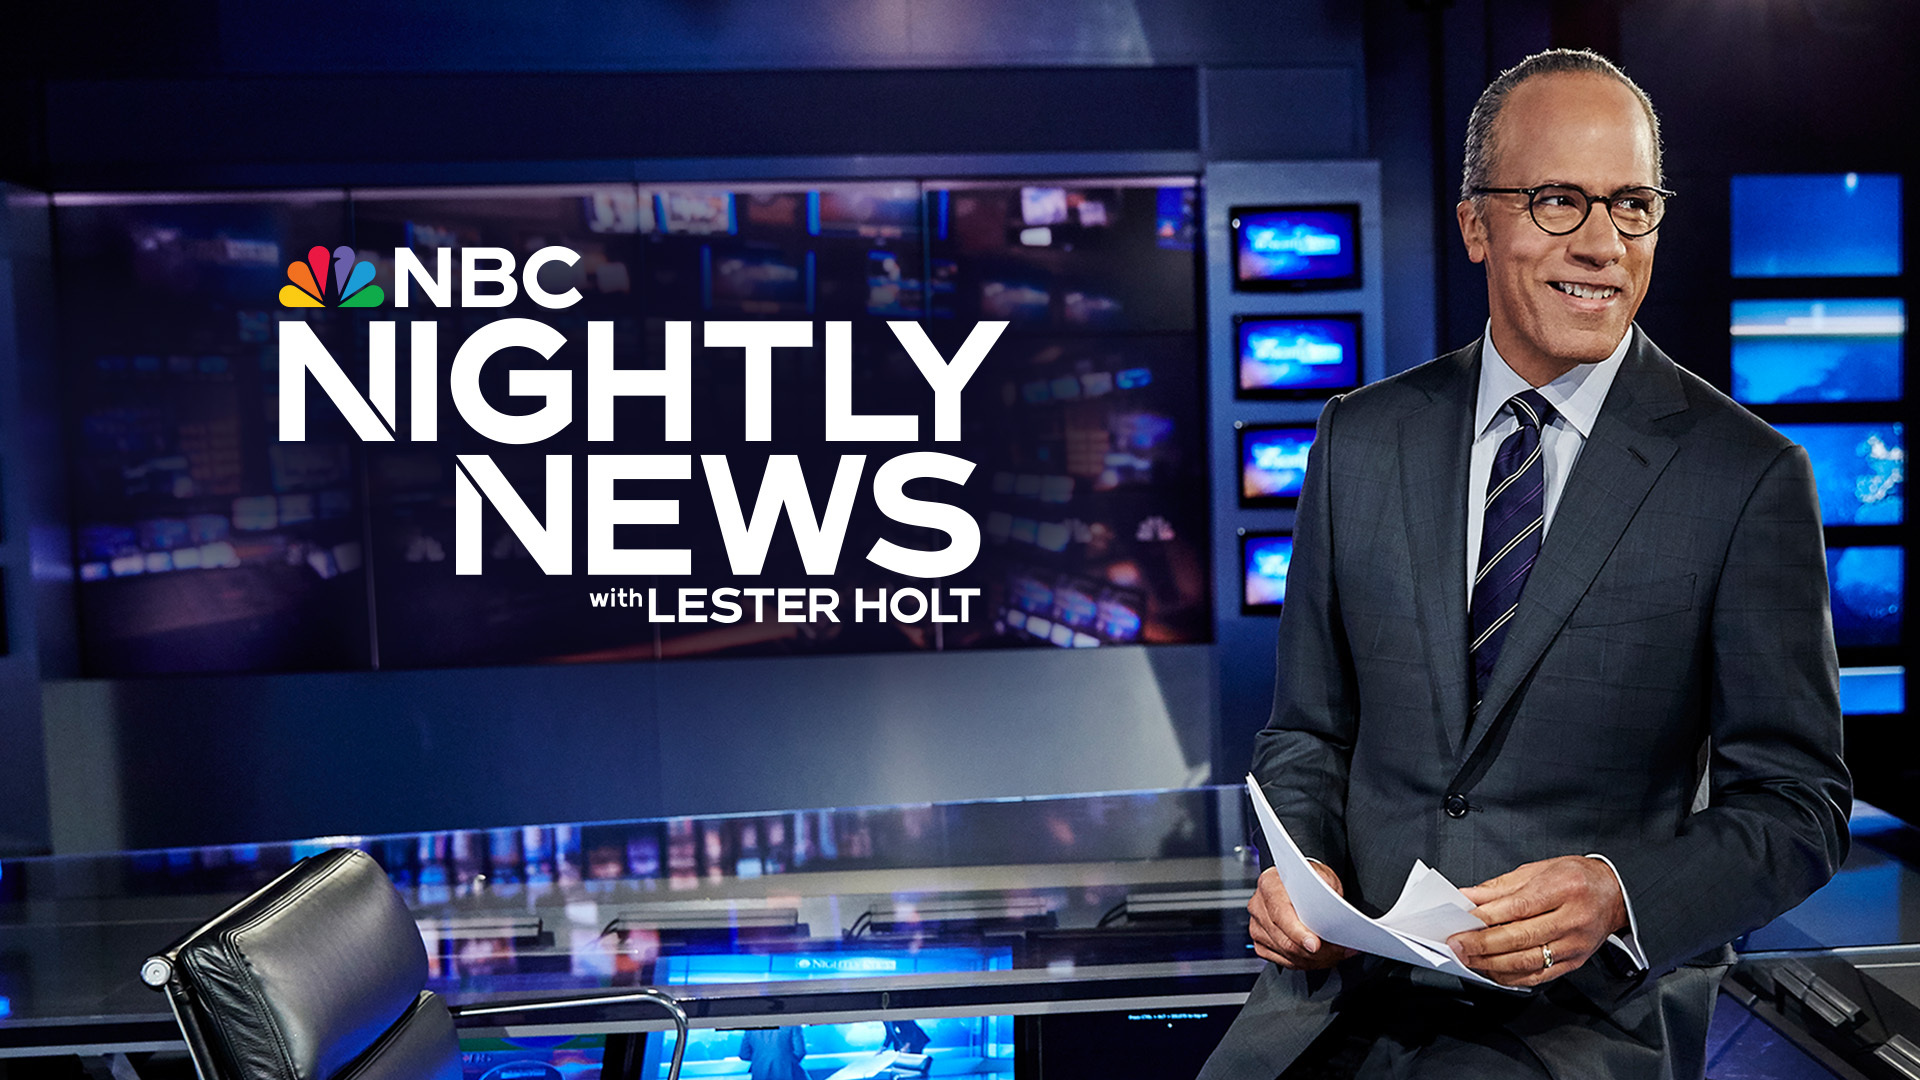 NBC NIGHTLY NEWS WINS WEDNESDAY – #1 EVENING NEWSCAST IN THE KEY A25-54 DEMO